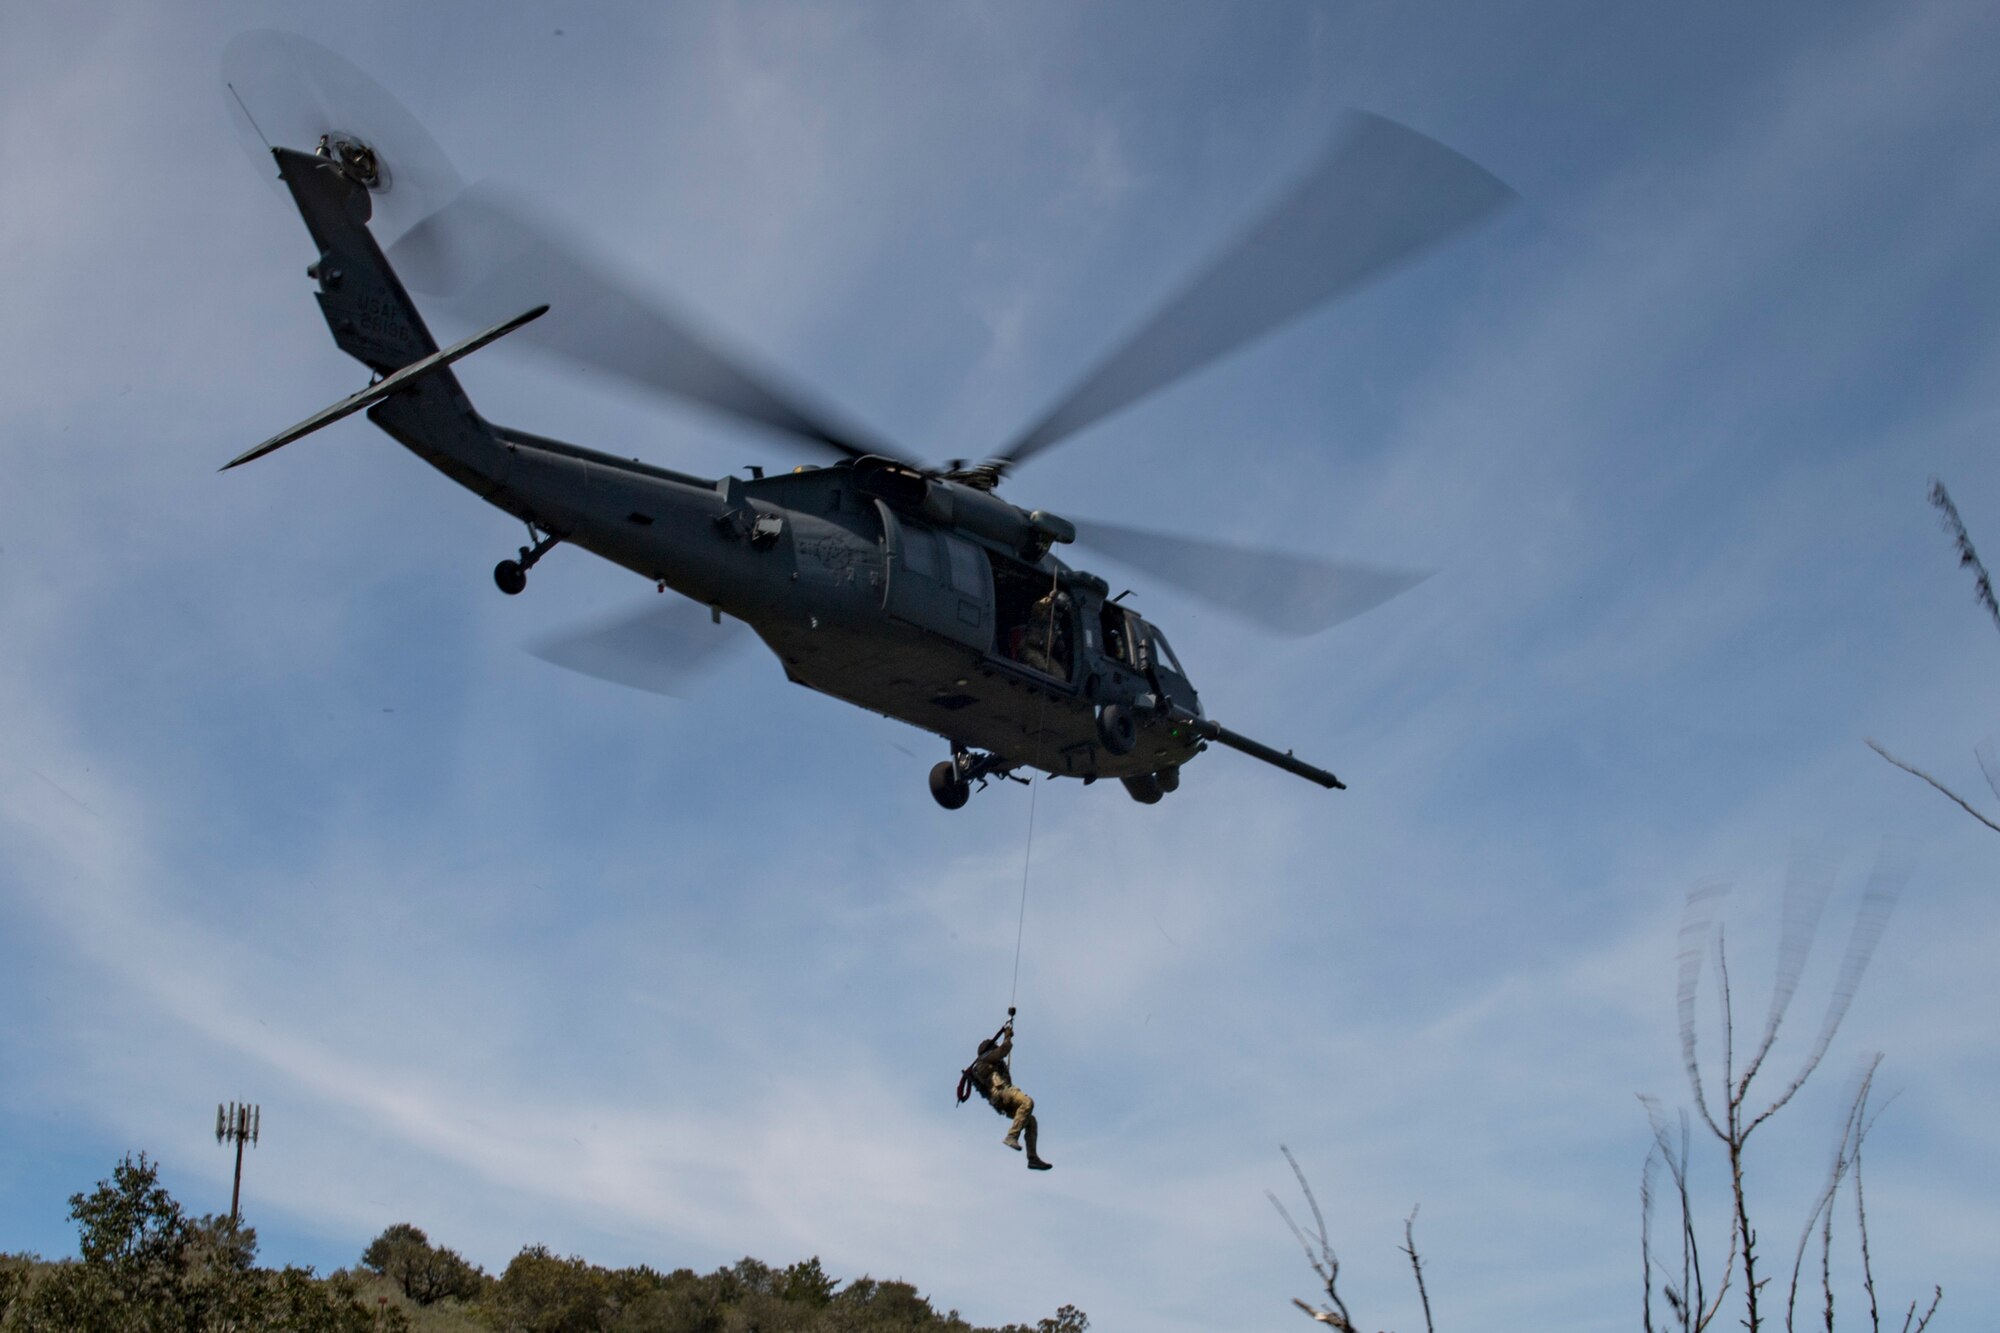 Airmen from the 55th Rescue Squadron, Davis-Monthan Air Force Base, Ariz., hoist a pararescueman from the 58th Rescue Squadron, Nellis Air Force Base, Nev., and a simulated casualty during Tiger Rescue IV, March 30, 2018, at Vandenberg Air Force Base, Calif. The four-day exercise challenged Airmen from multiple rescue squadrons to bring the capabilities of the personnel recovery triad together to successfully complete rescue missions and maintain proficiency. The three branches of the personnel recovery triad are the HC-130J, HH-60G and the guardian angel weapons system or pararescuemen. (U.S. Air Force photo by Tech. Sgt. Zachary Wolf)